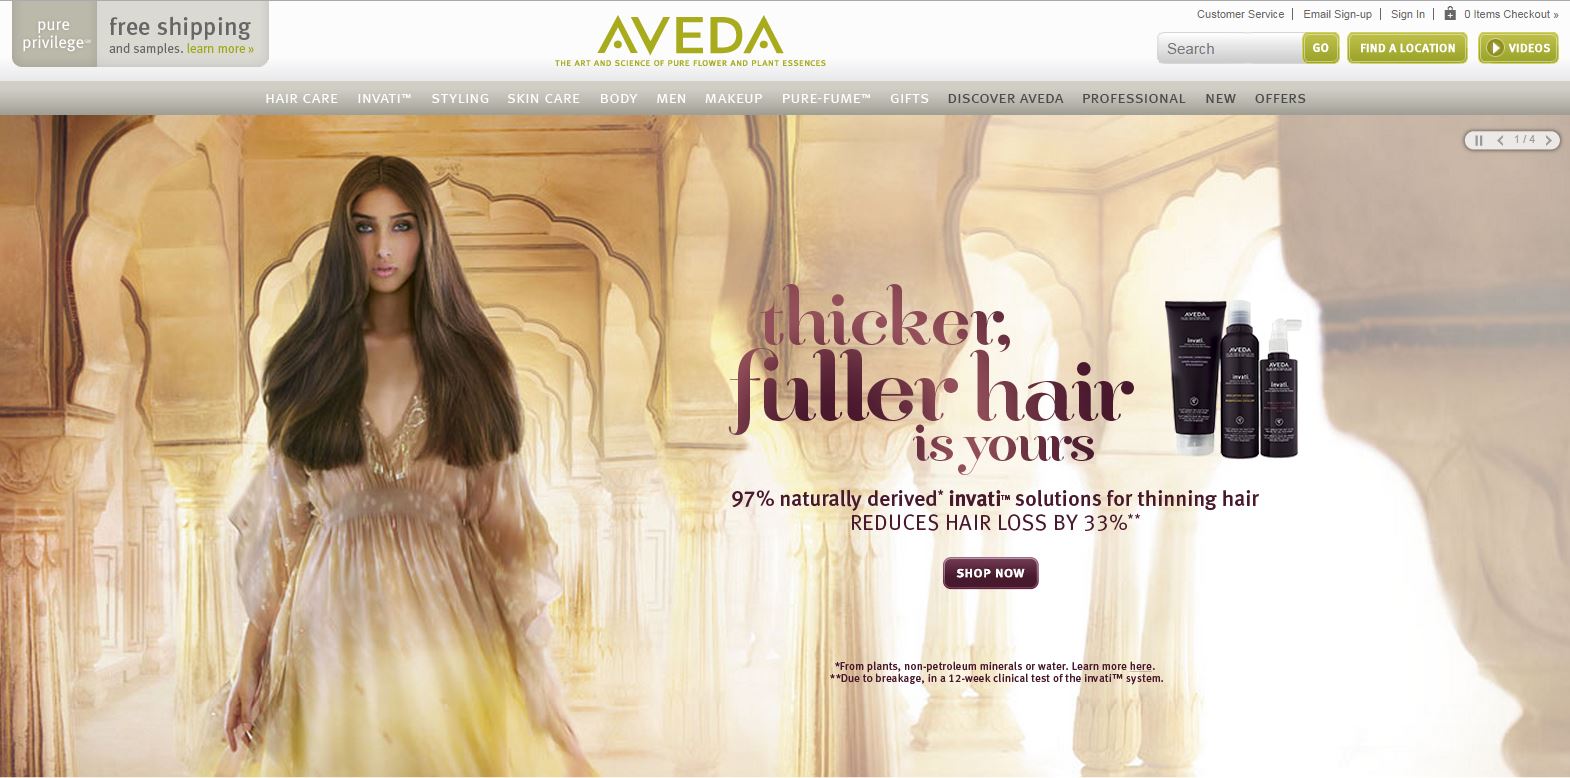 Aveda - Building Brand Recognition 